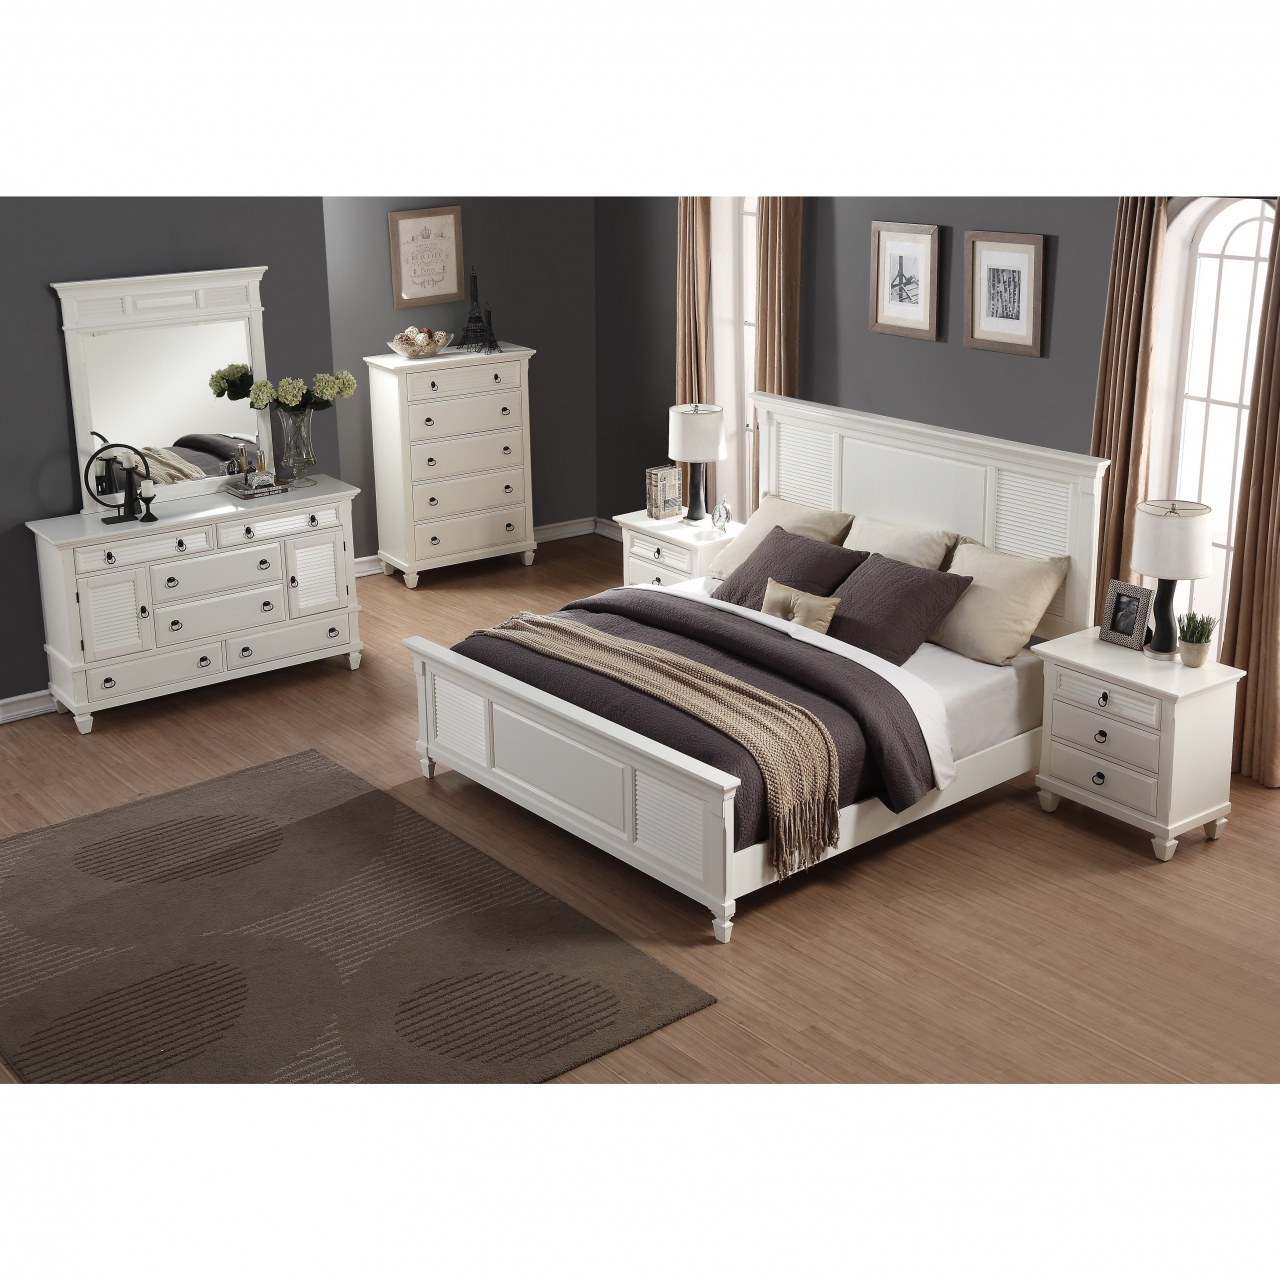 Queen Bedroom Sets Mattress Included Regitina White 6 Piece within size 1280 X 1280